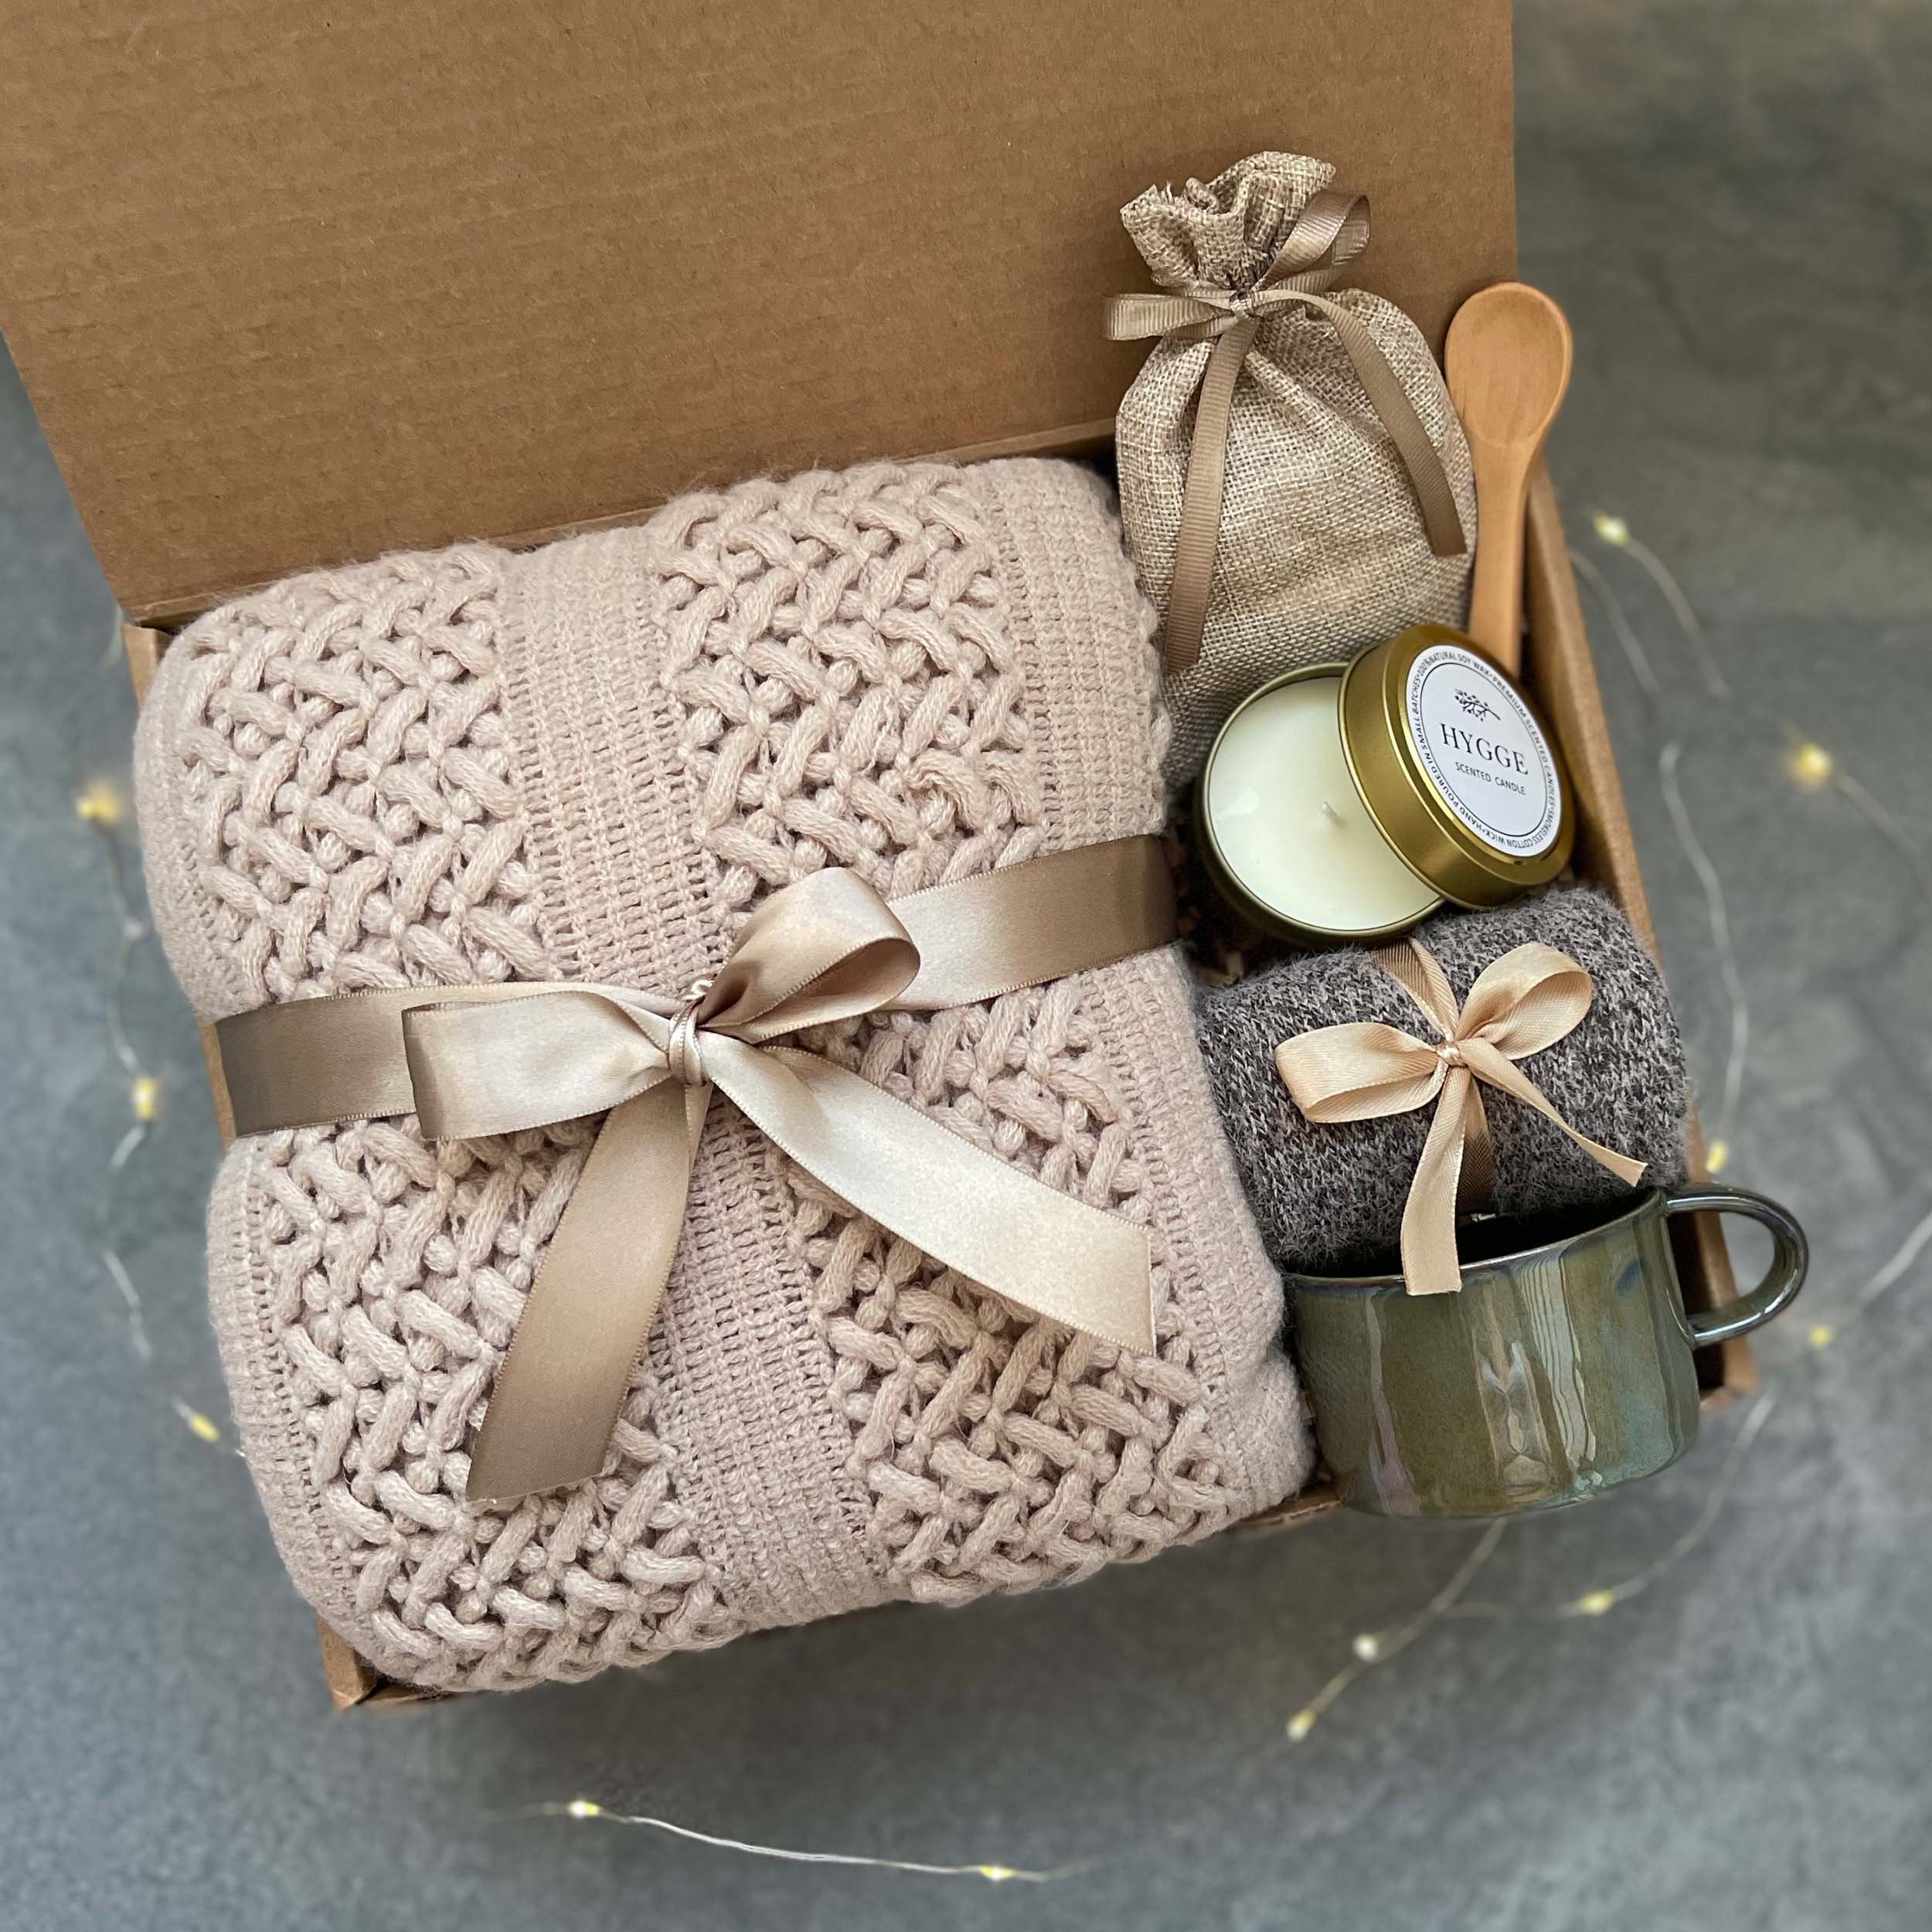 Christmas Gifts for Women, Birthday Gifts Basket for Friends  Gifts for Her Girlfriend Sister Mom Unique Gifts Box Soap Candle Tumbler:  Wine Glasses